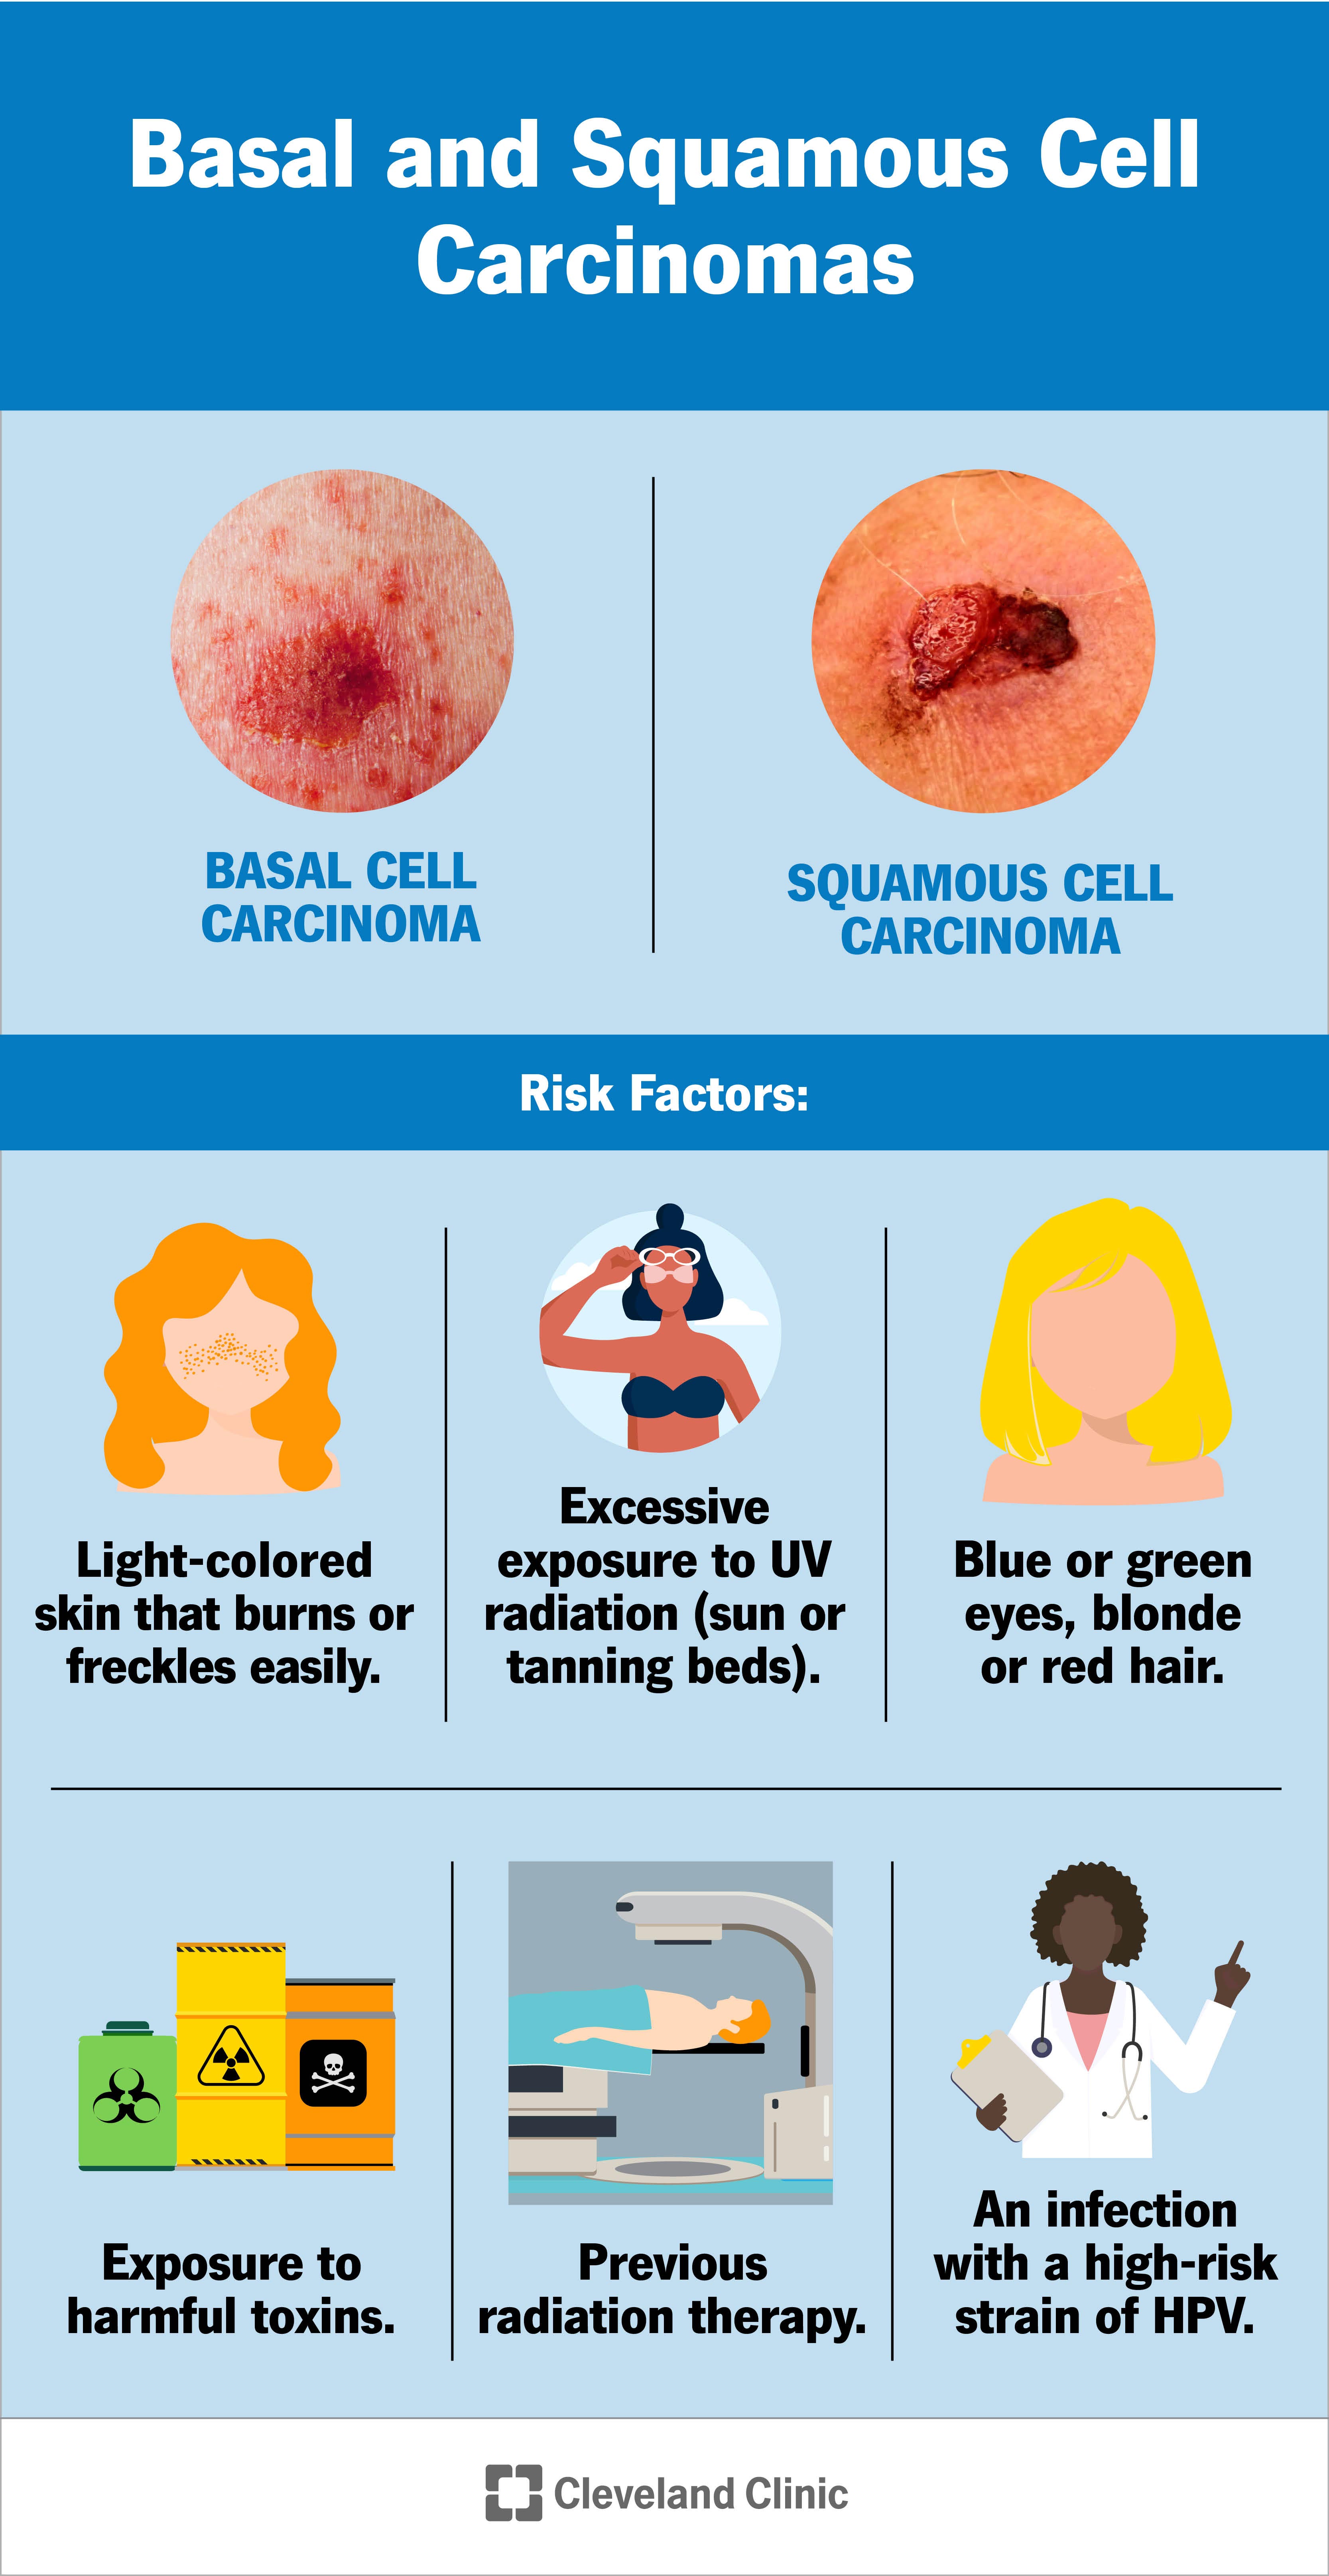 Basal and squamous cell carcinoma risk factors include having blonde or red hair and exposure to excessive UV radiation.